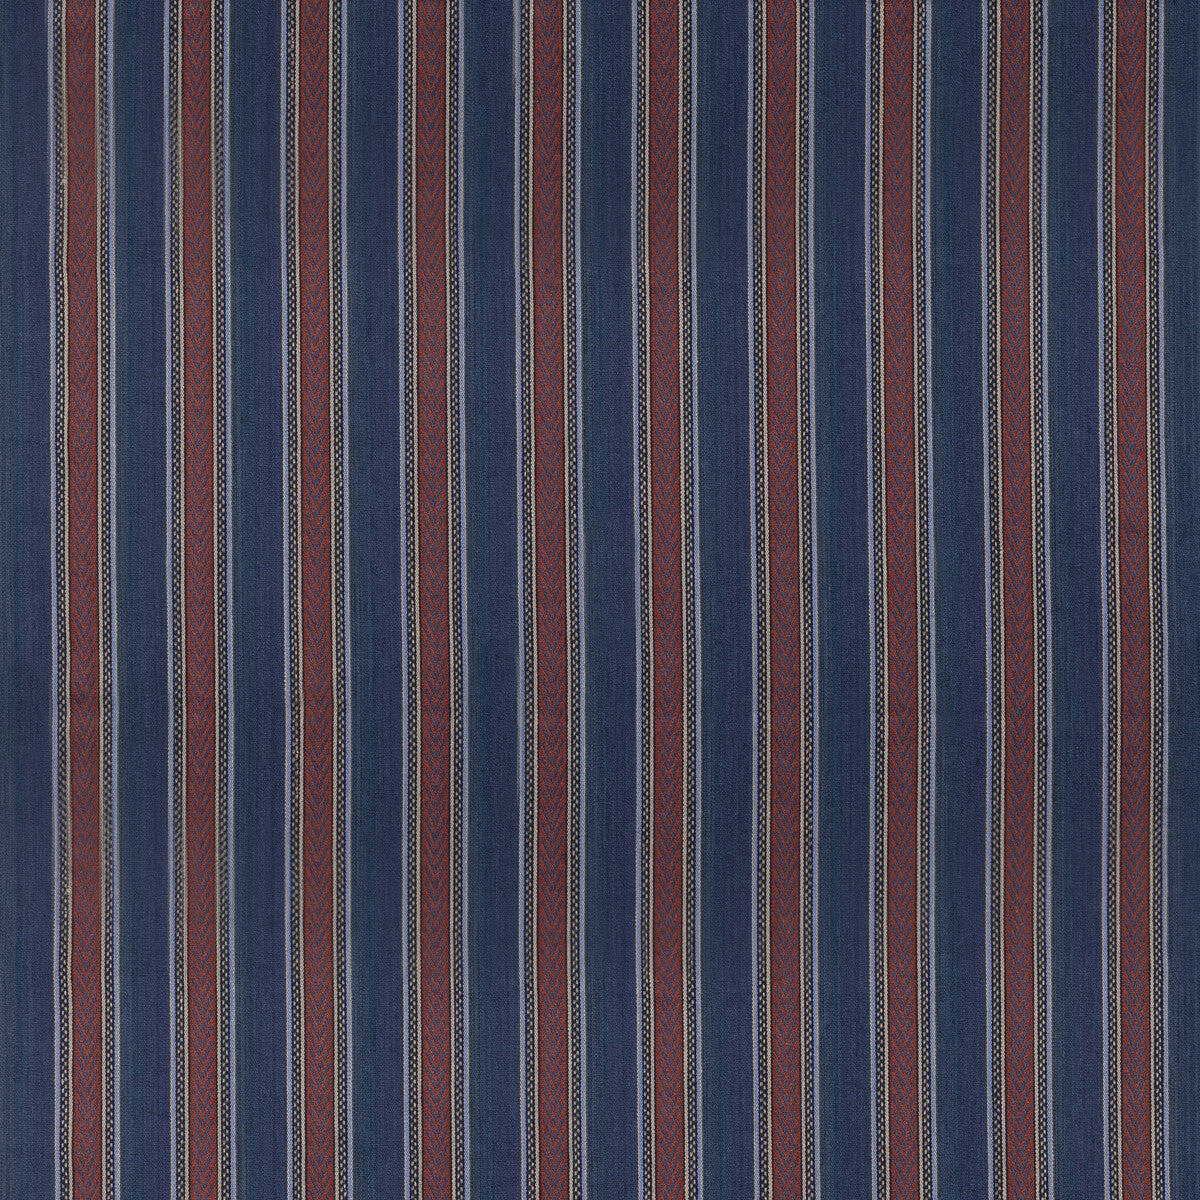 Barrington Stripe fabric in indigo/red color - pattern FD826.G103.0 - by Mulberry in the Westerly Stripes collection